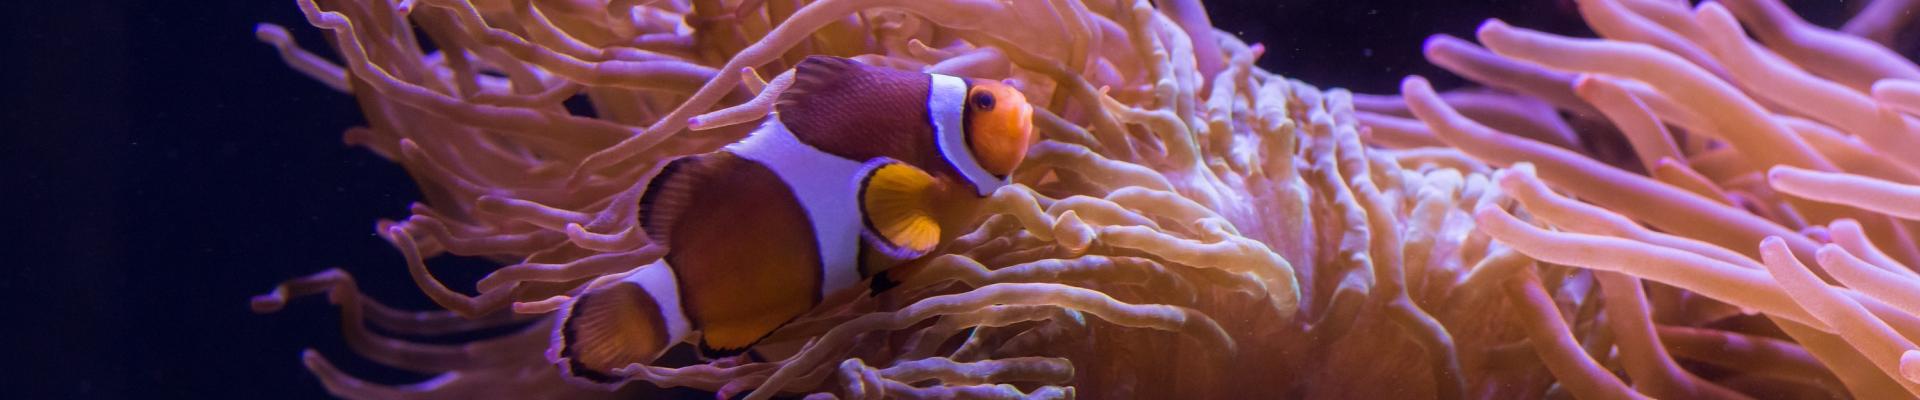 Clownfish in The Deep's Slime exhibit.